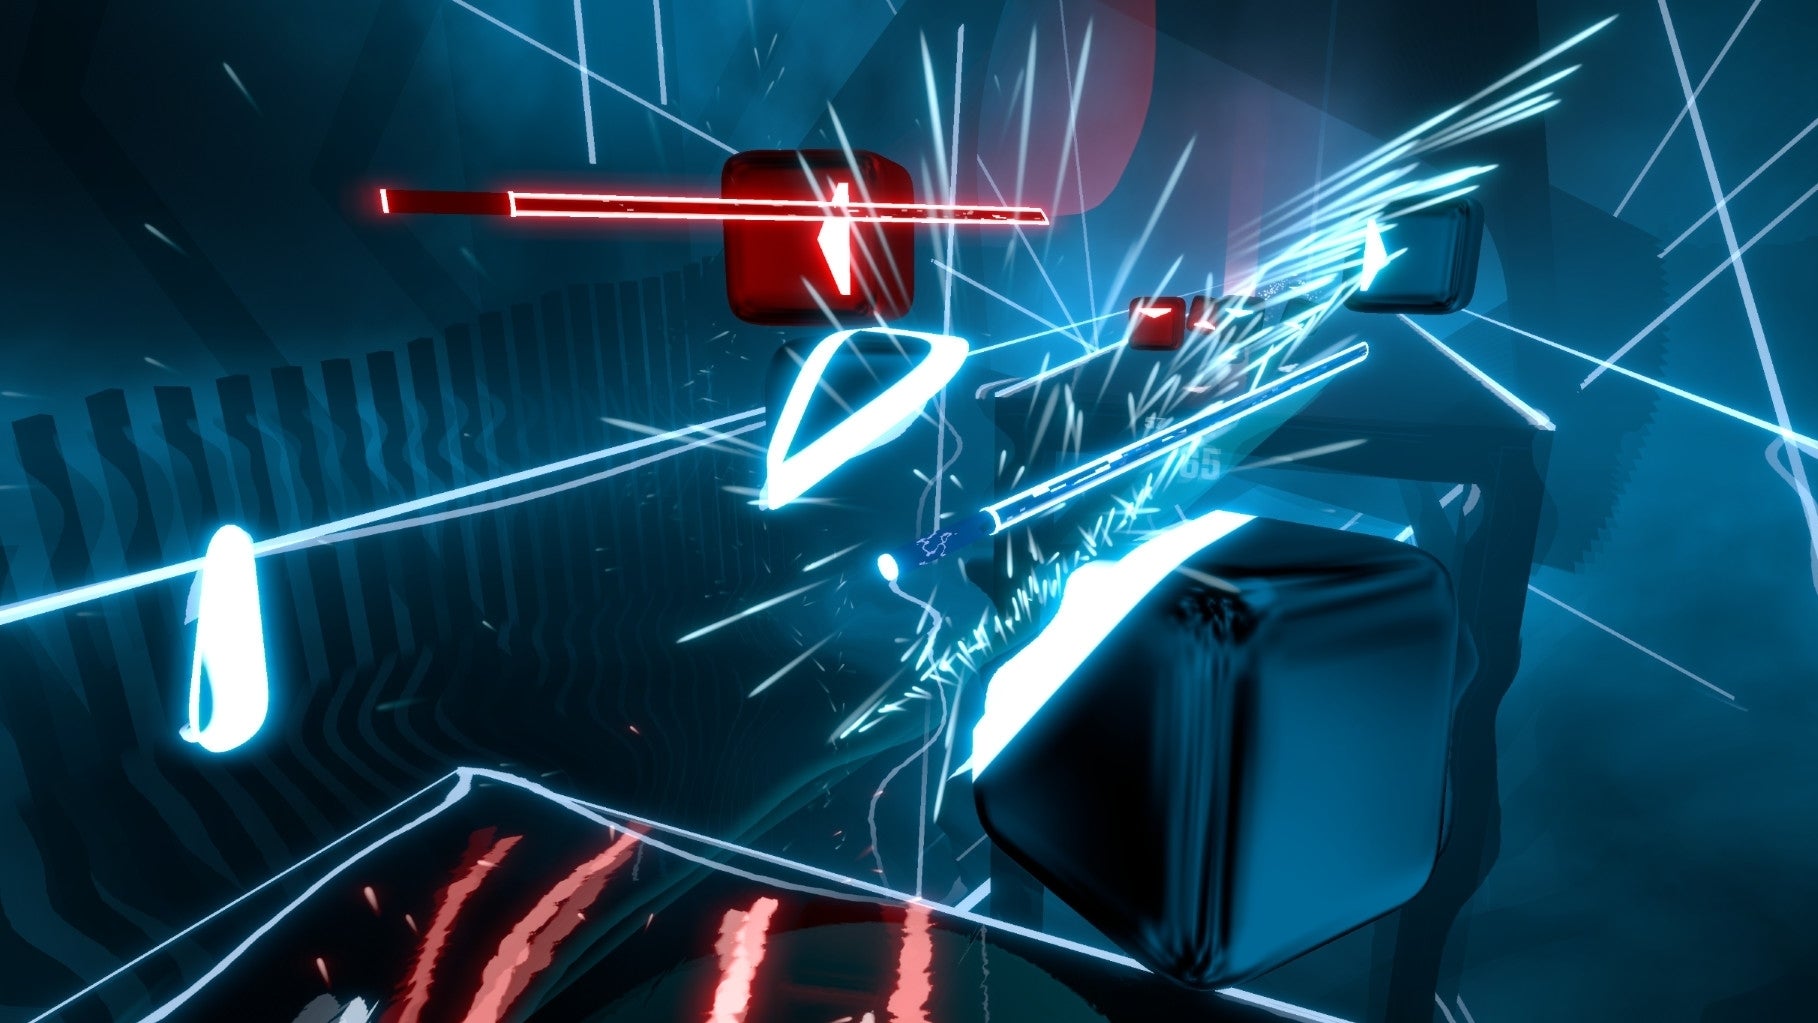 Image for VR rhythm phenomenon Beat Saber leaving PC early access next week with price increase